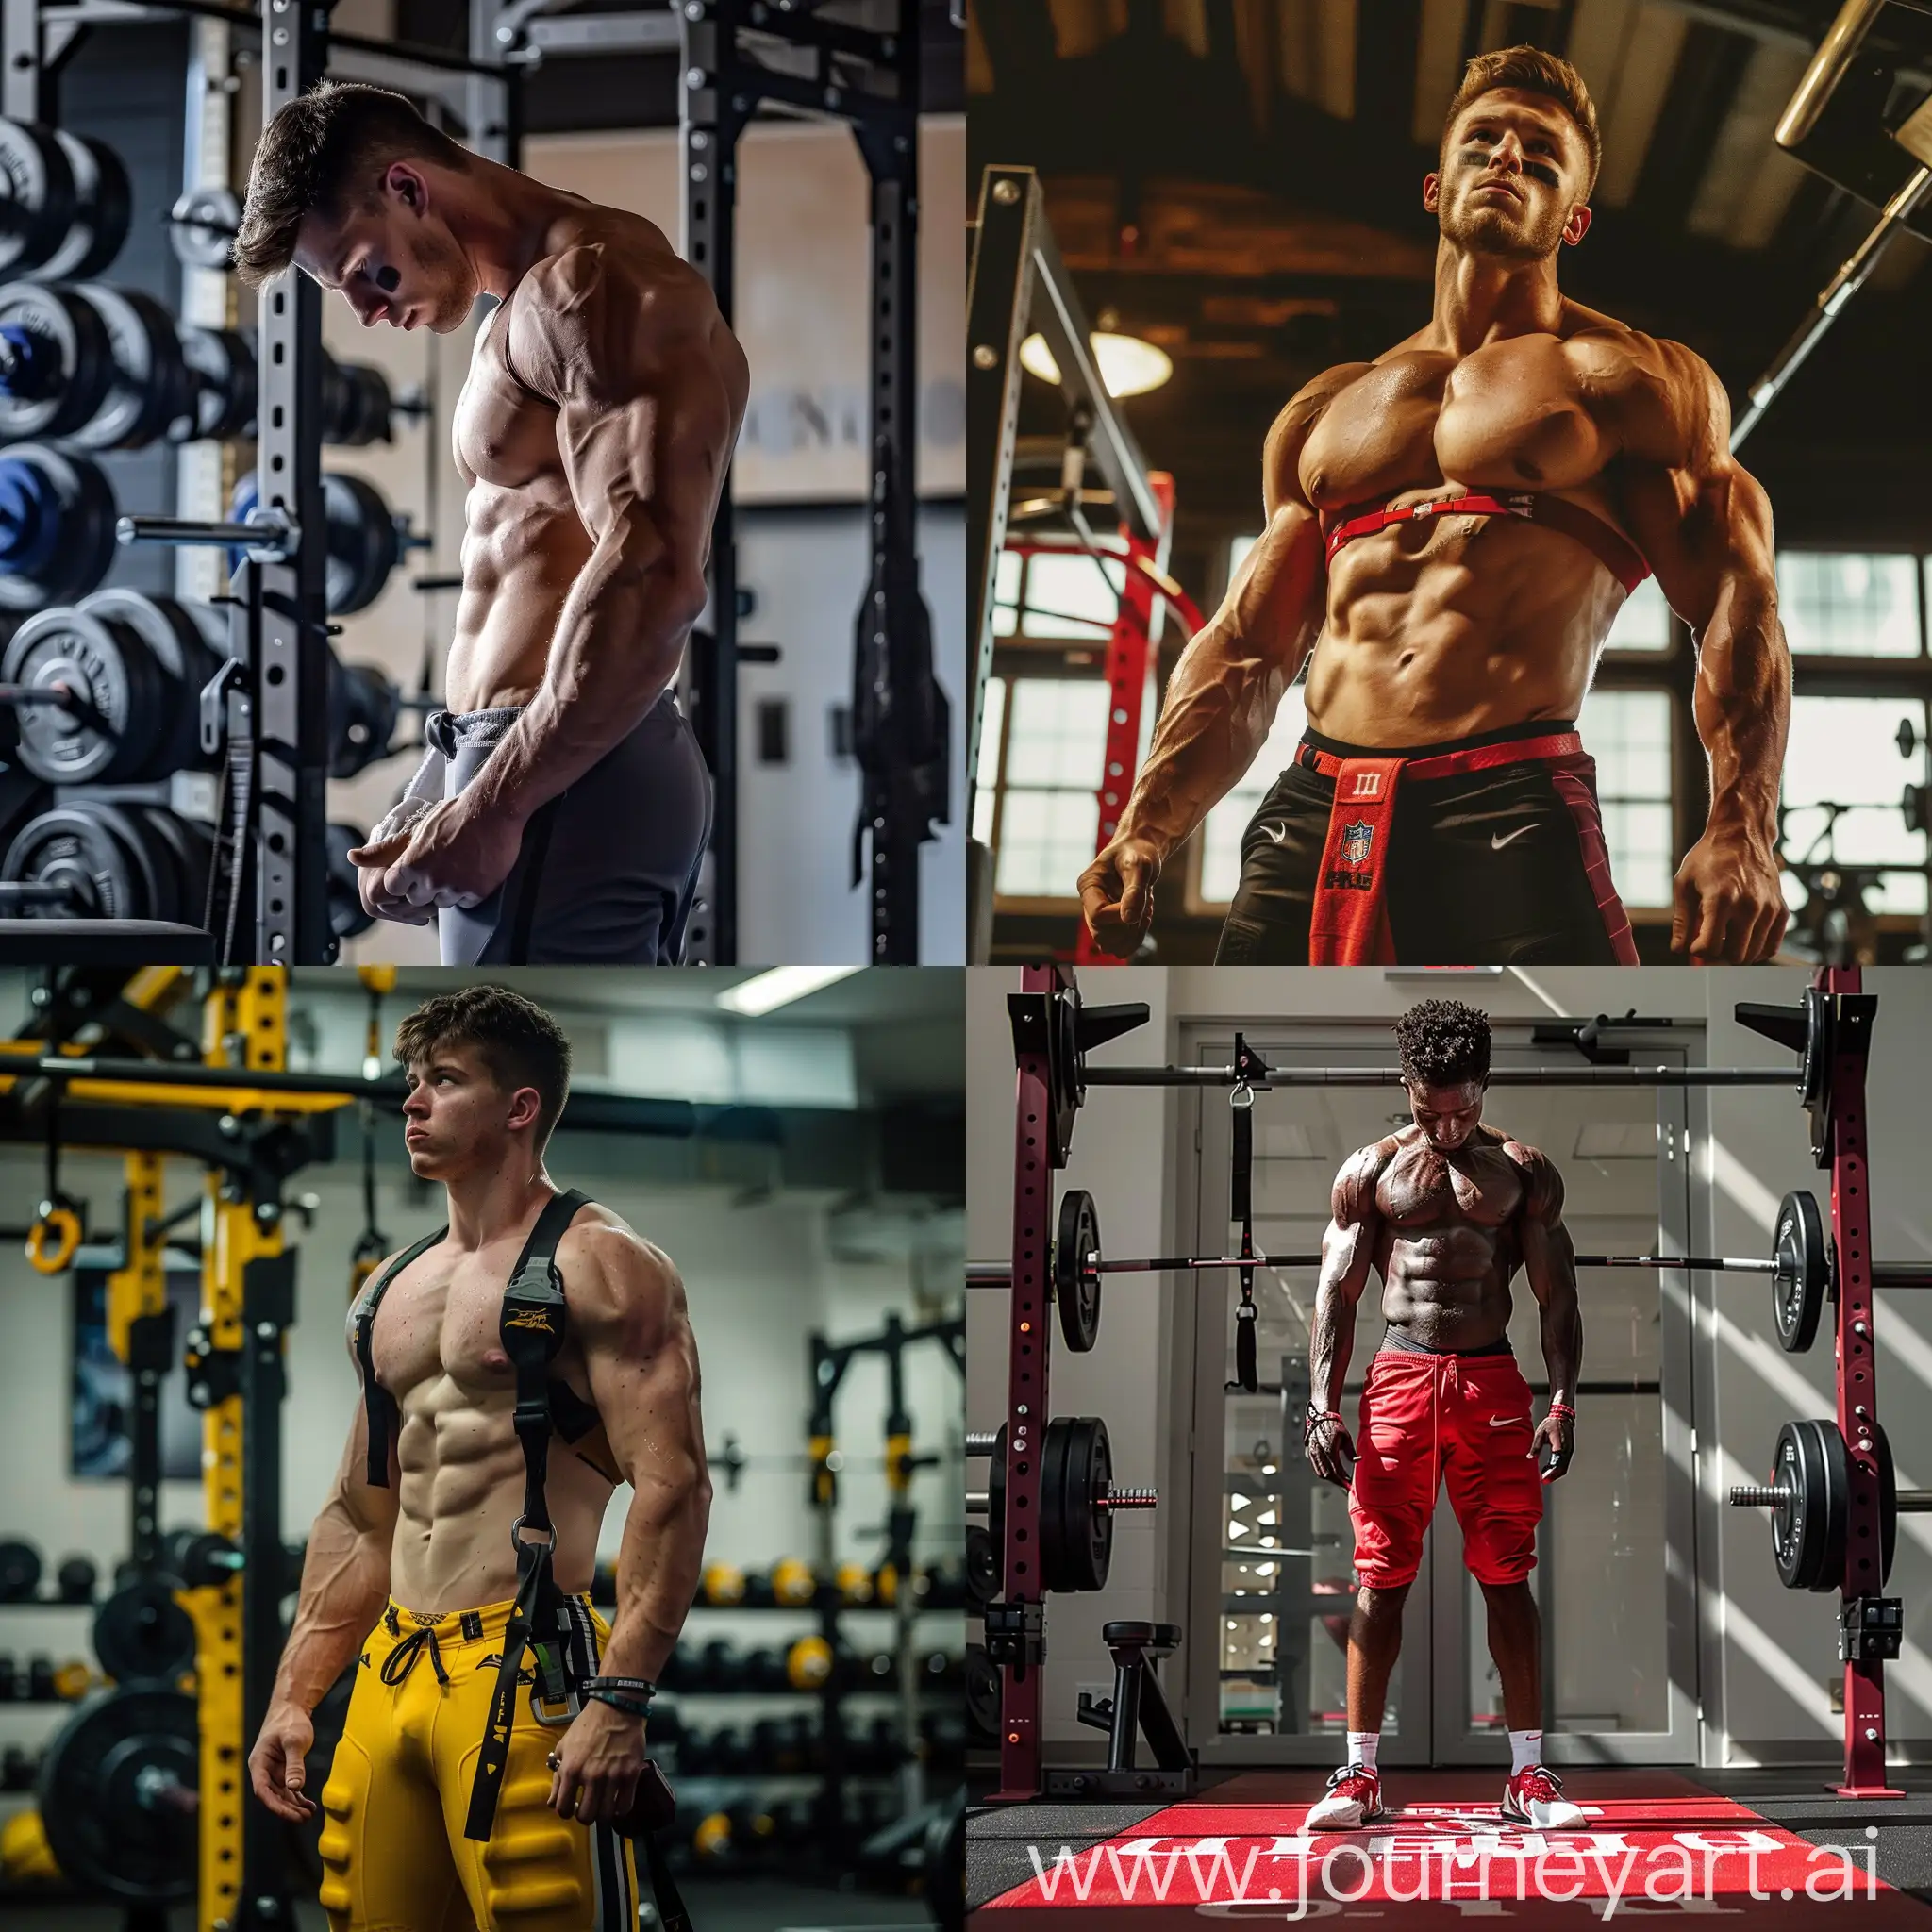 Athletic-College-Football-Jock-Training-in-Dynamic-Weight-Room-Scene